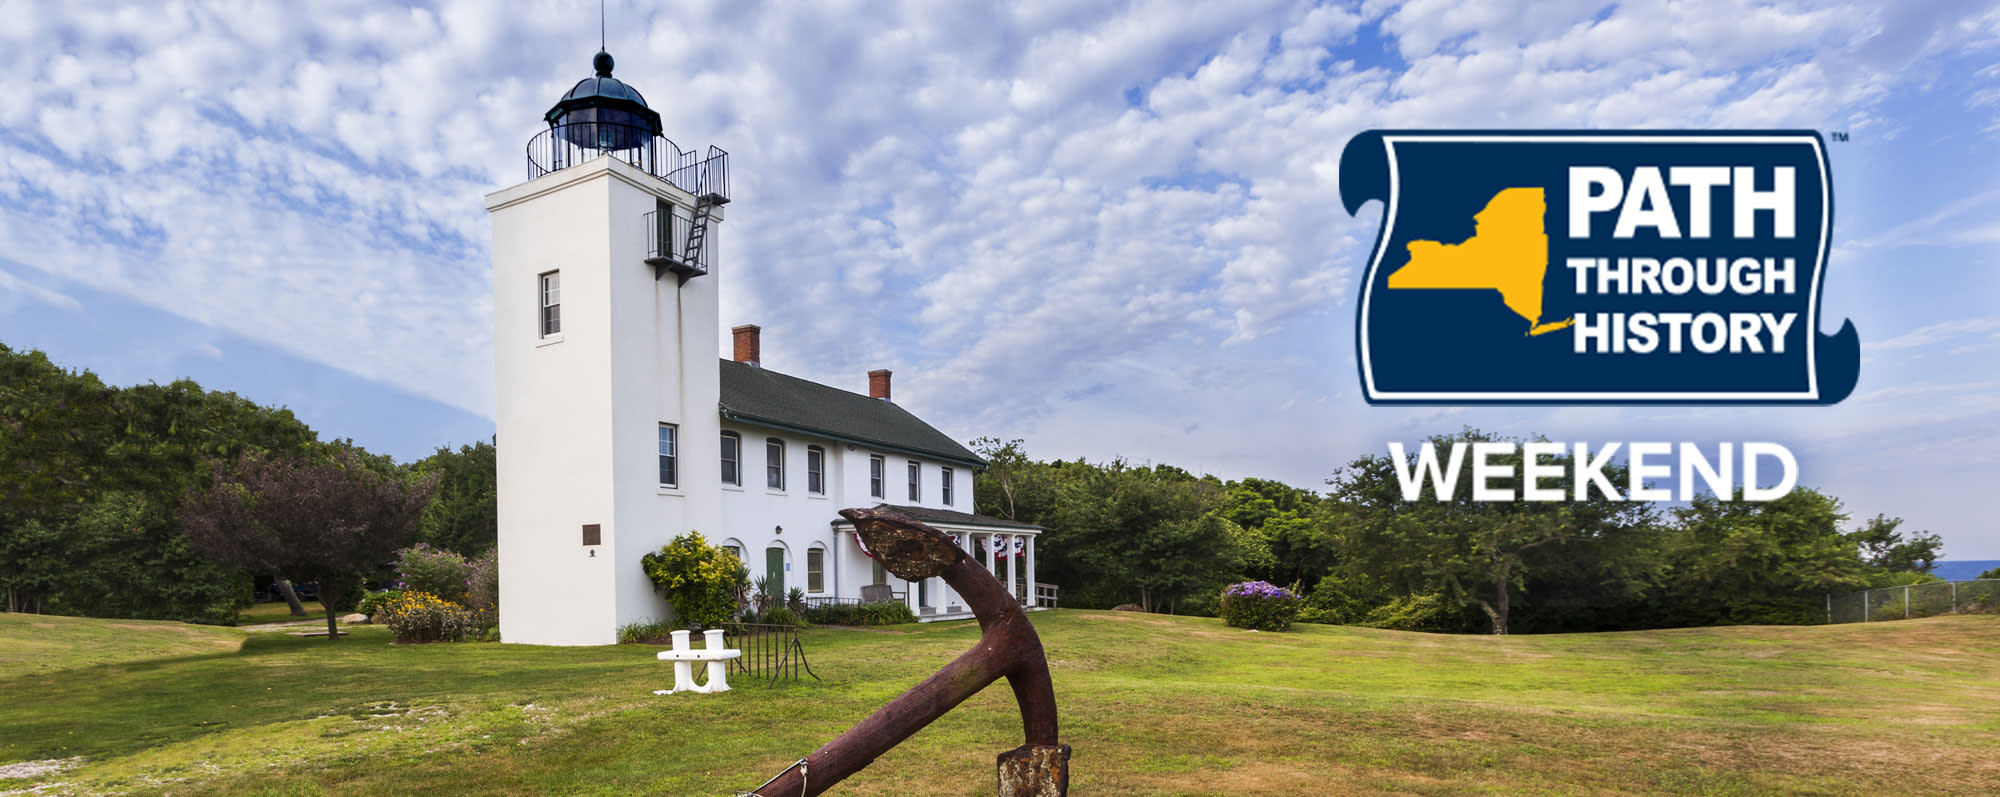 The Horton Point Lighthouse Museum with the Path Through History Weekend logo